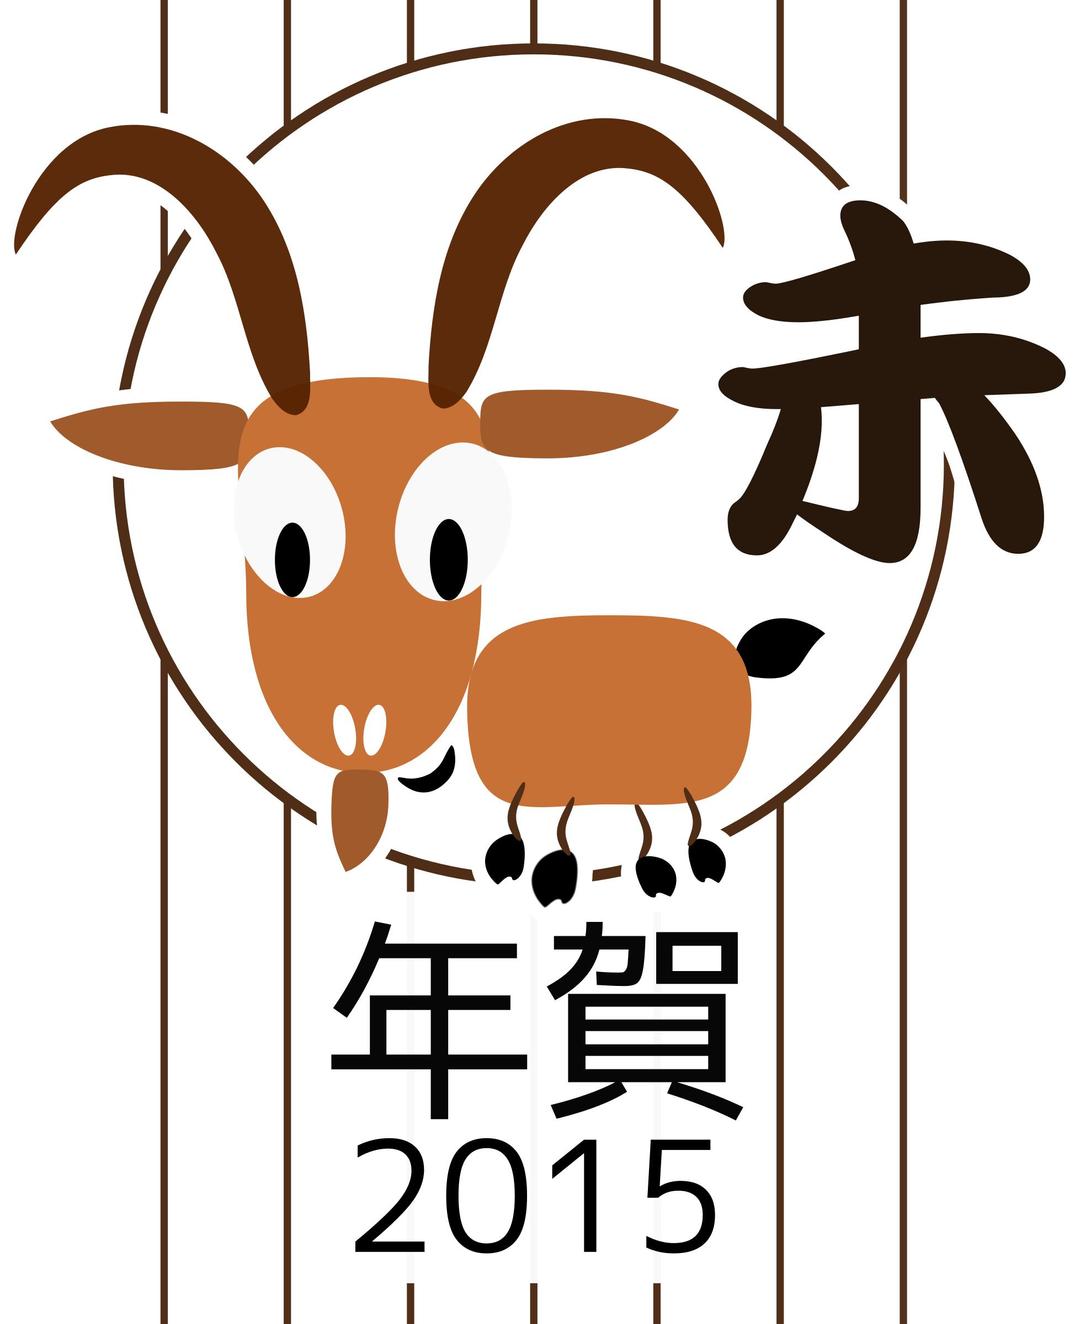 Chinese zodiac goat - Japanese version - 2015 png transparent